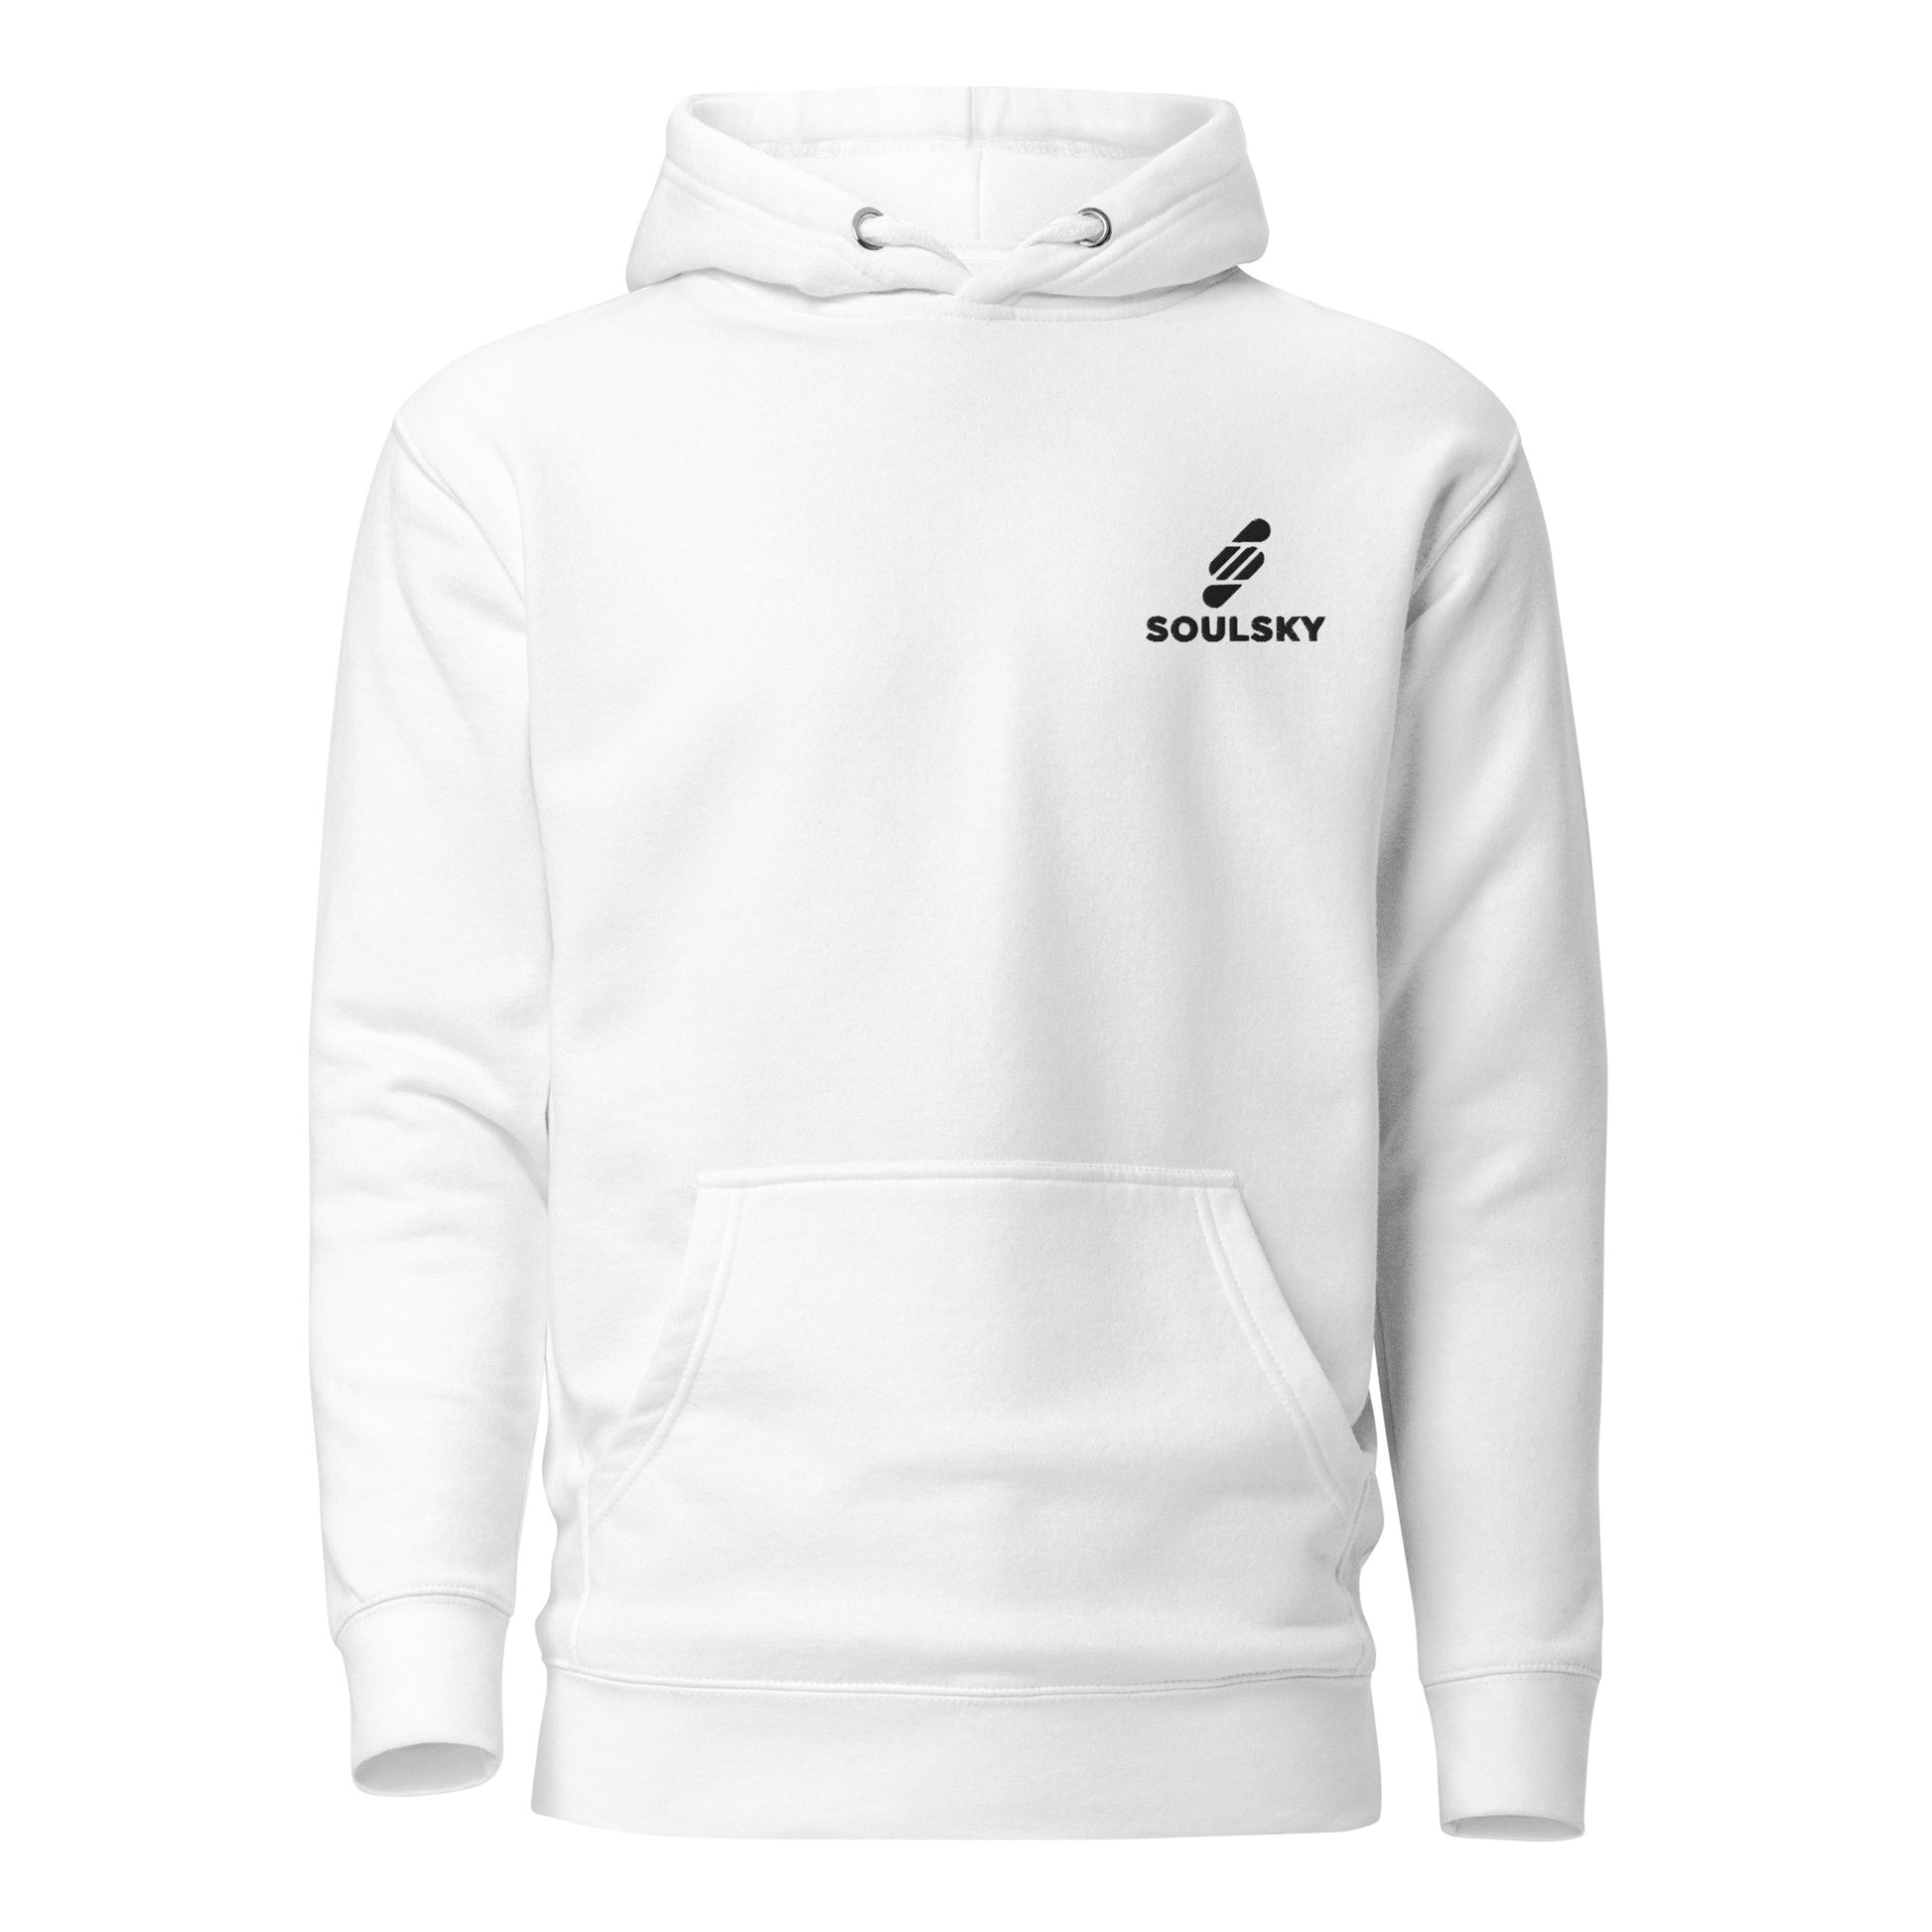 White hoodie with white embroidered logo on the upper left side that says 'SOULSKY'.